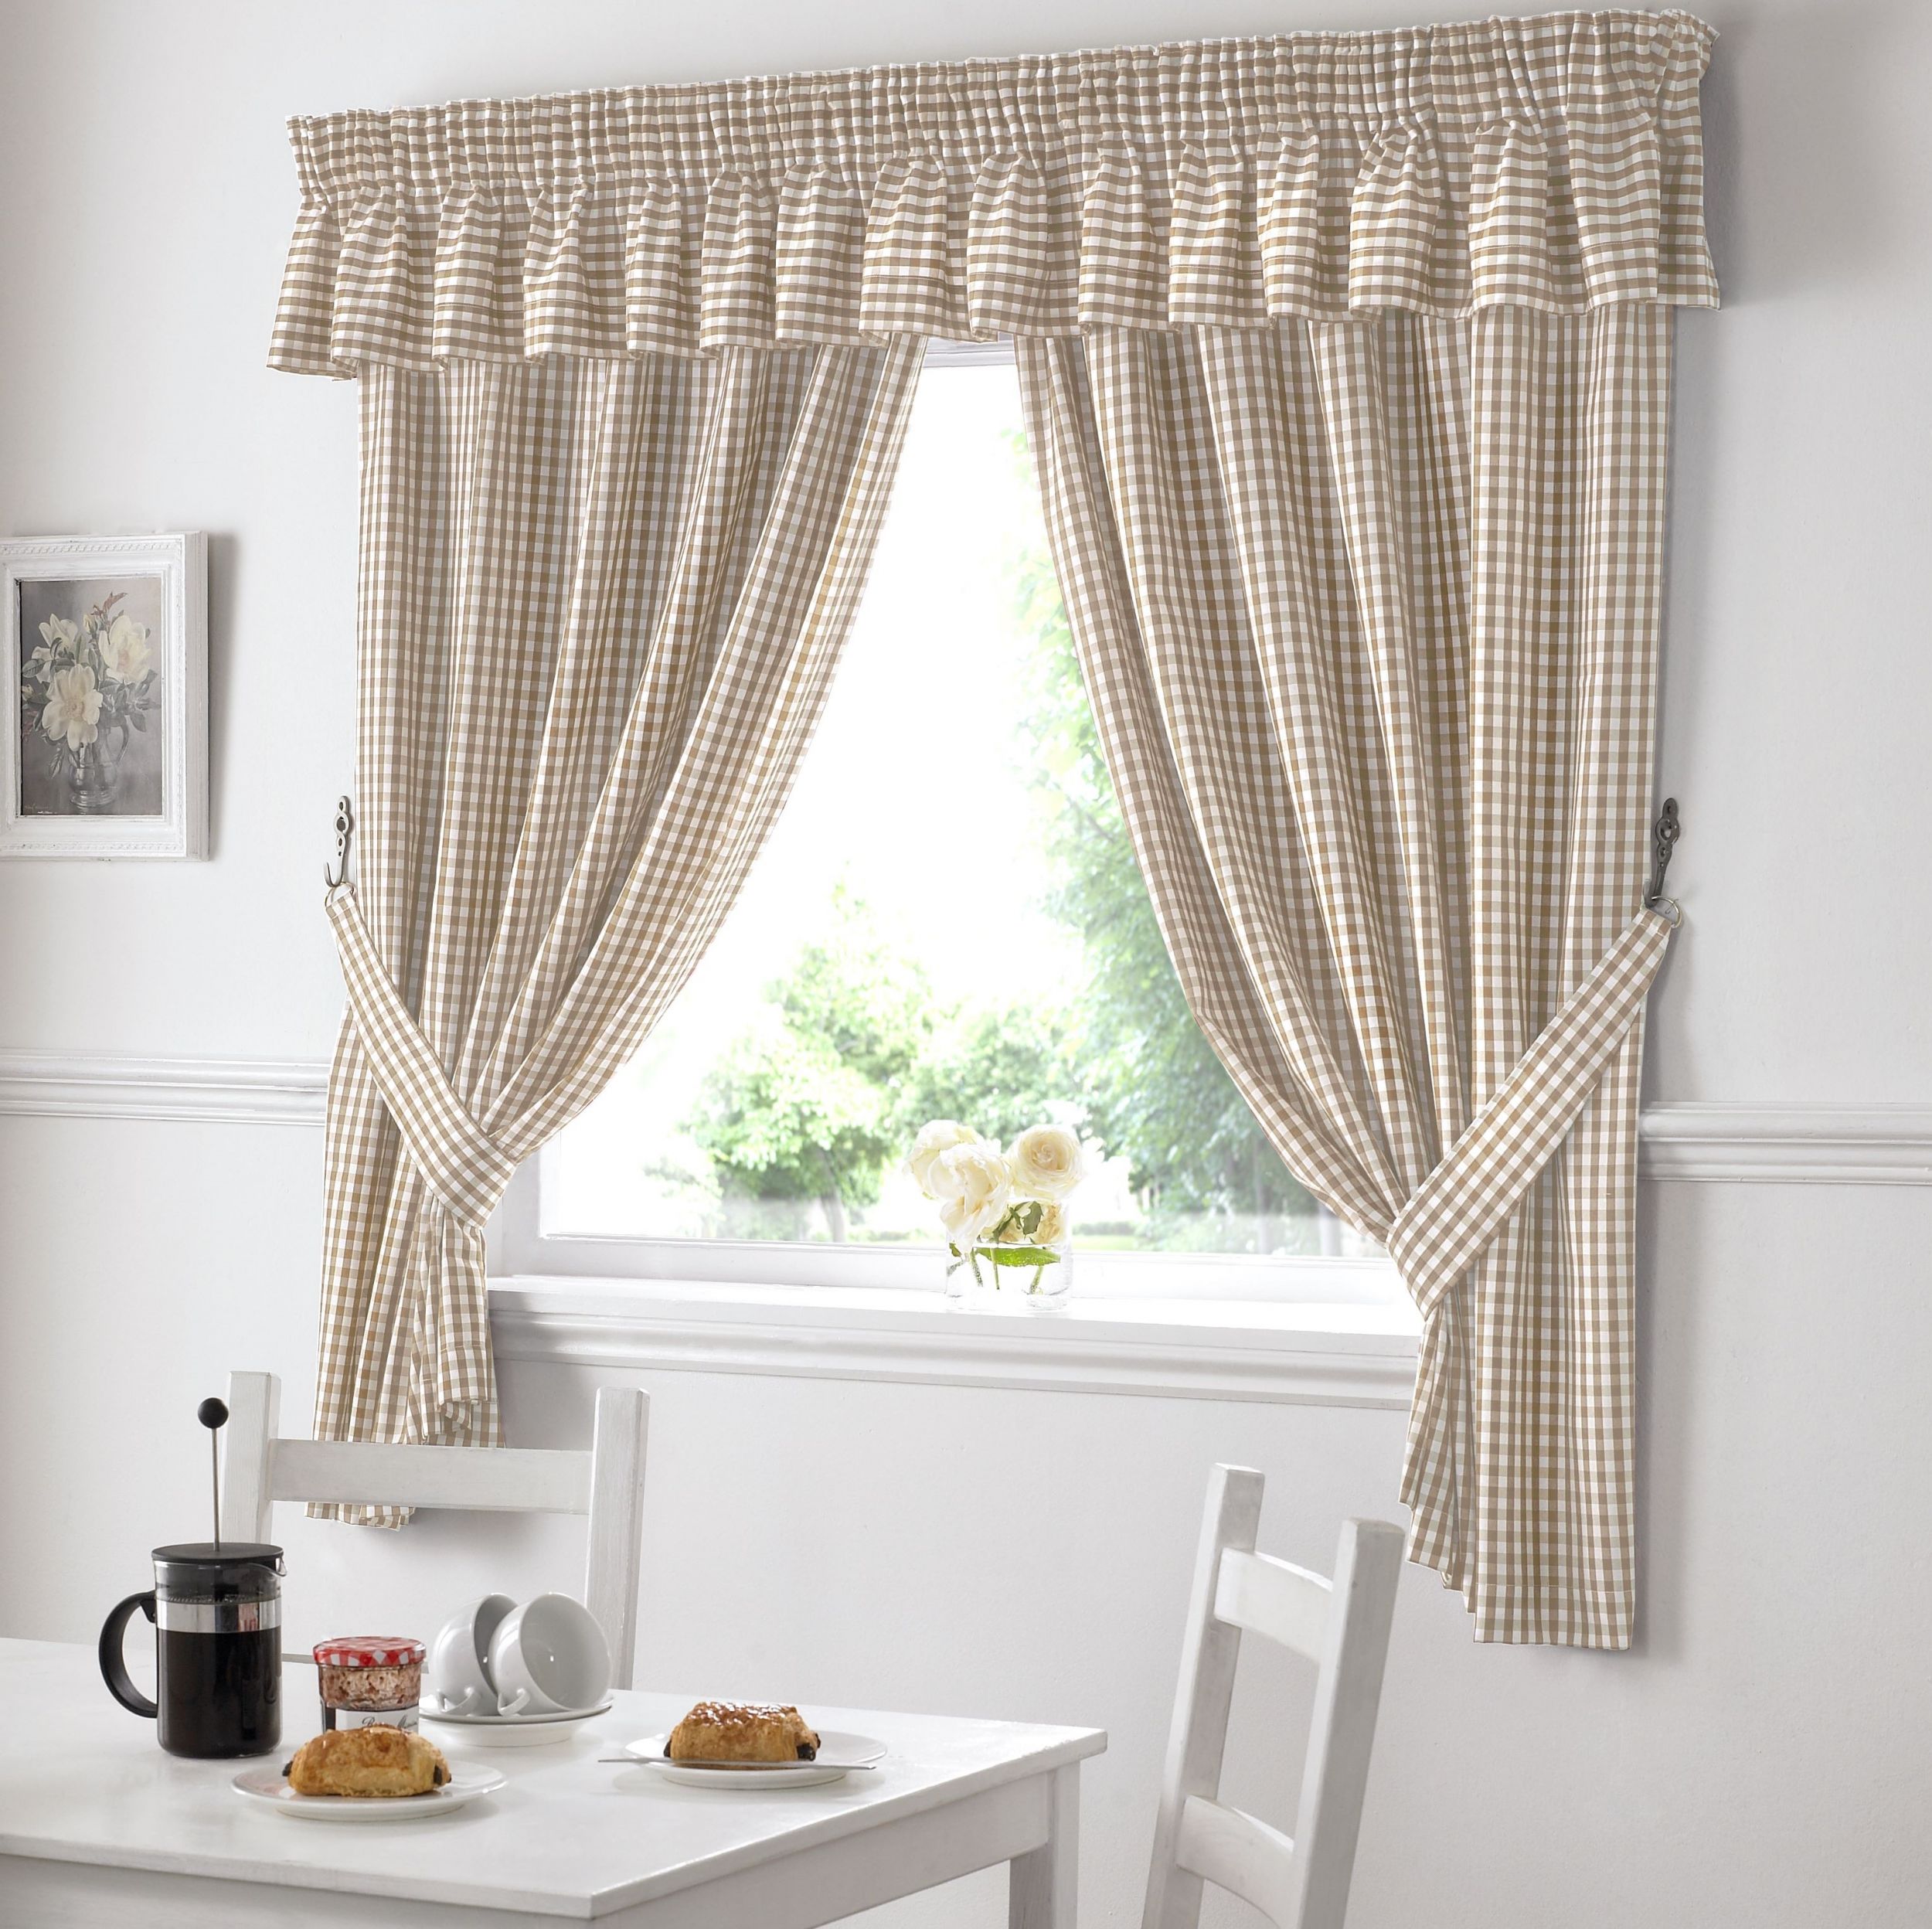 Gingham Check Kitchen Curtains 5 Great Colours All Size & Great Value For Money 